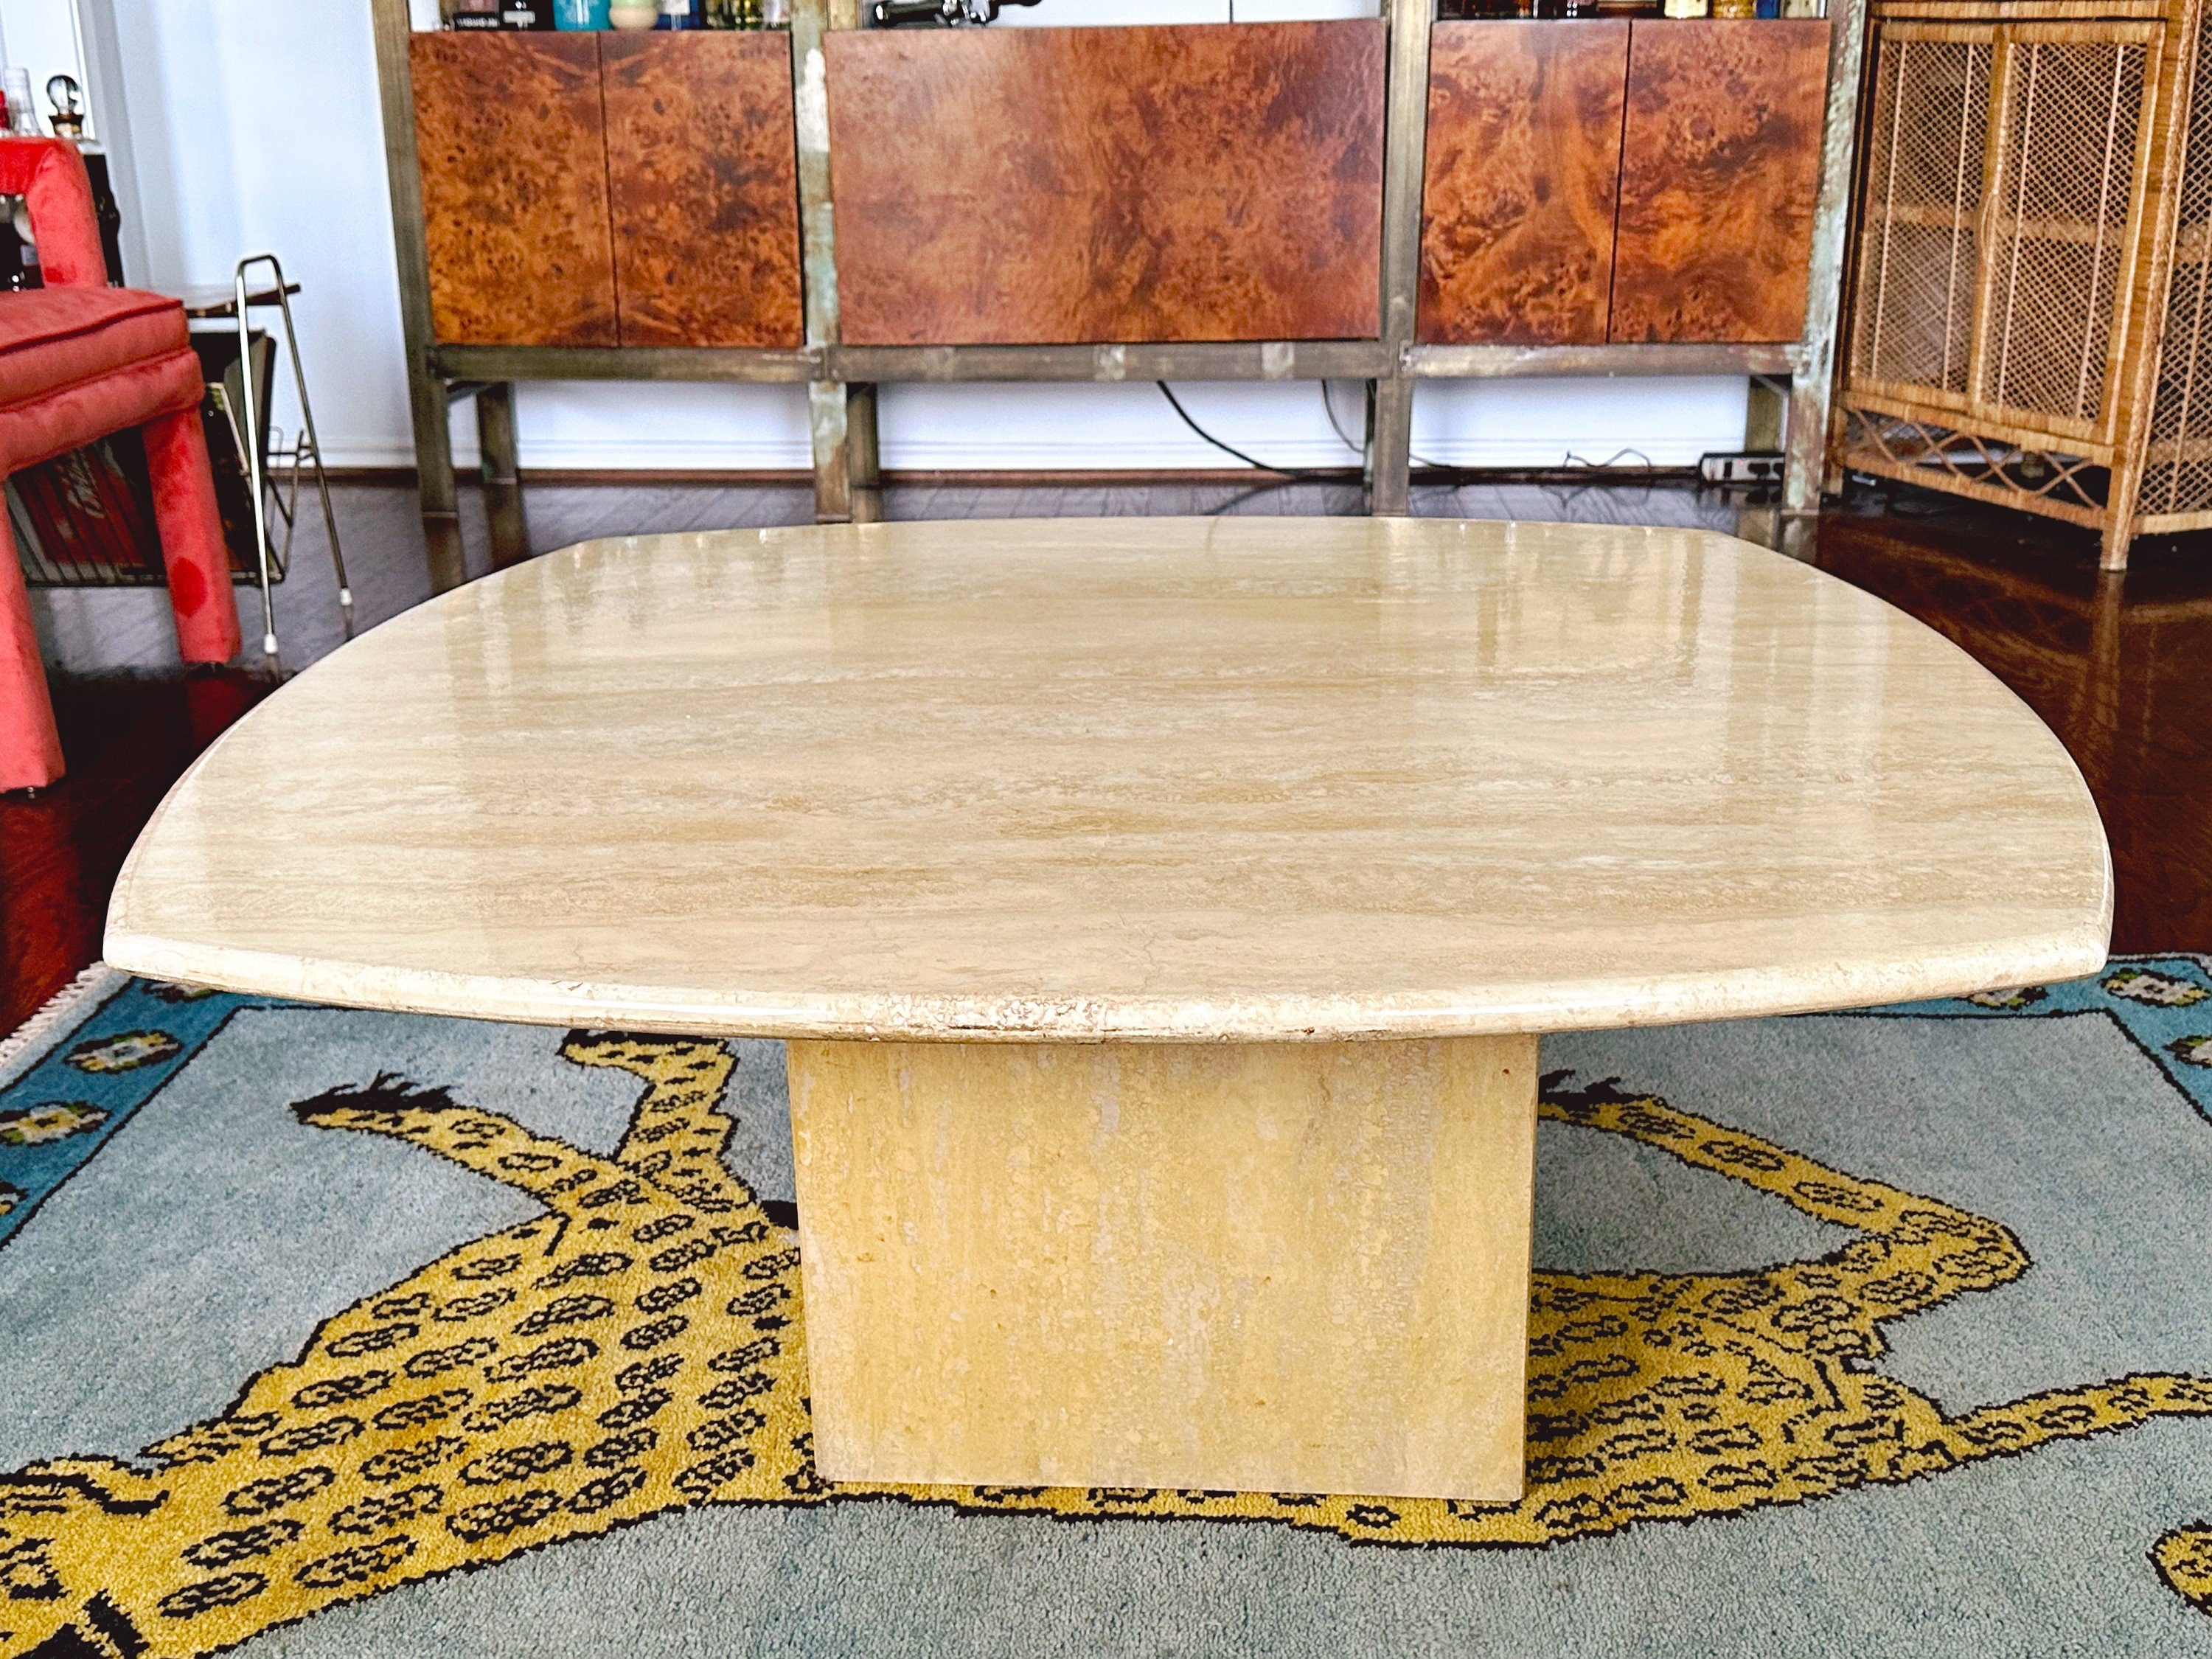 Vintage 1980s Italian Travertine Coffee Table | SHIPPING NOT FREE | Cream Colored Marble Natural Stone Postmodern Living Room Furniture